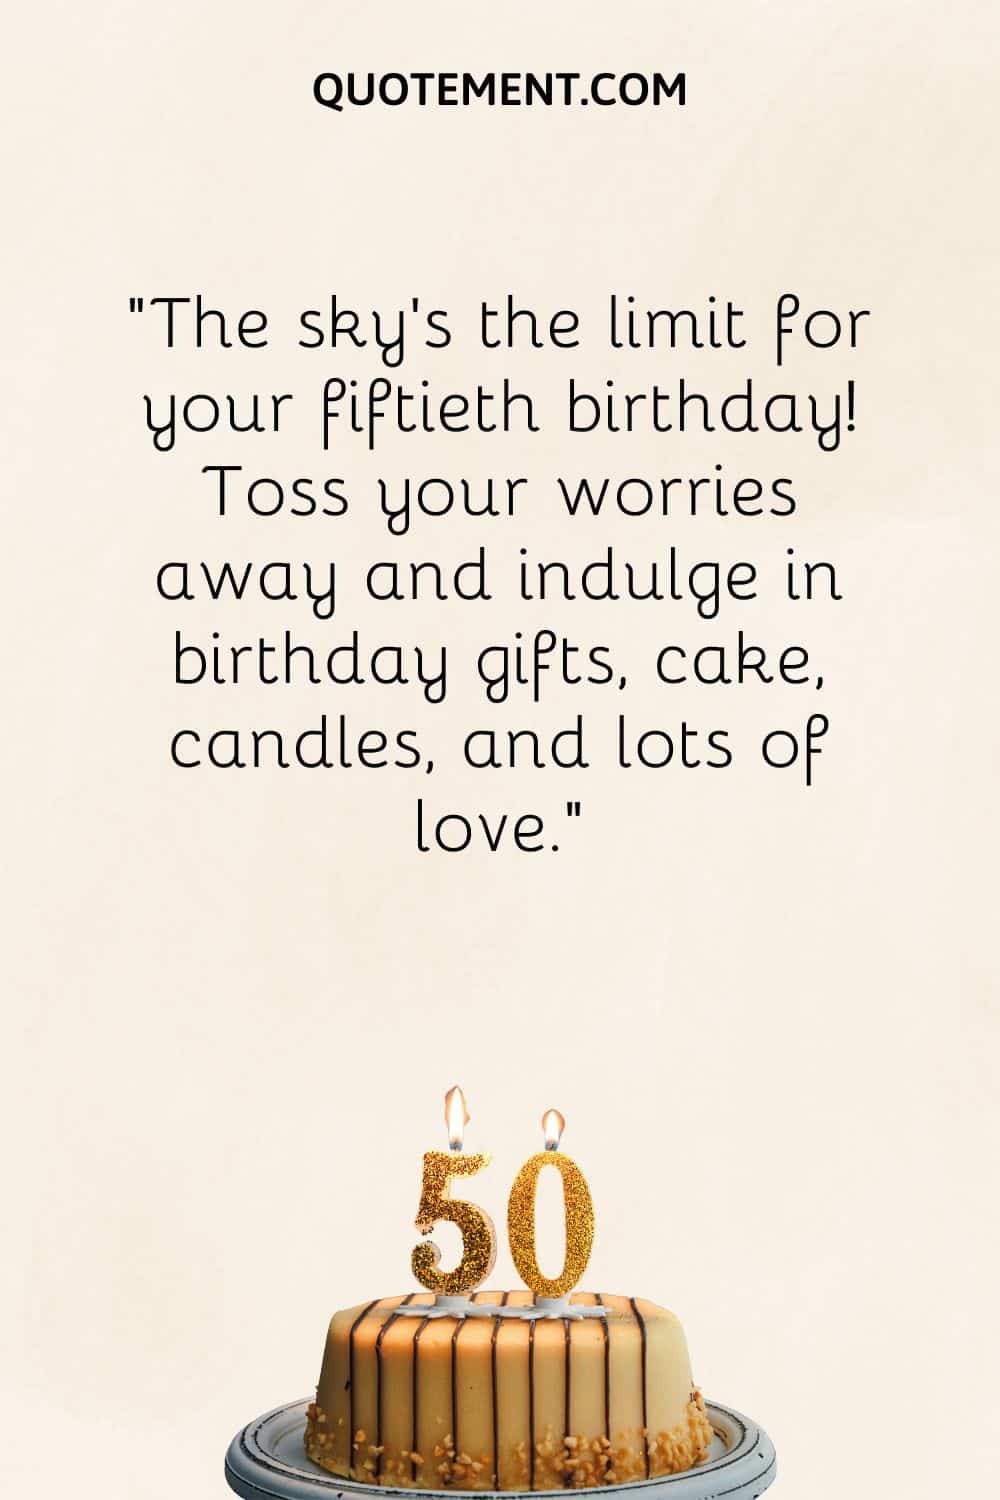 “The sky’s the limit for your fiftieth birthday! Toss your worries away and indulge in birthday gifts, cake, candles, and lots of love.”